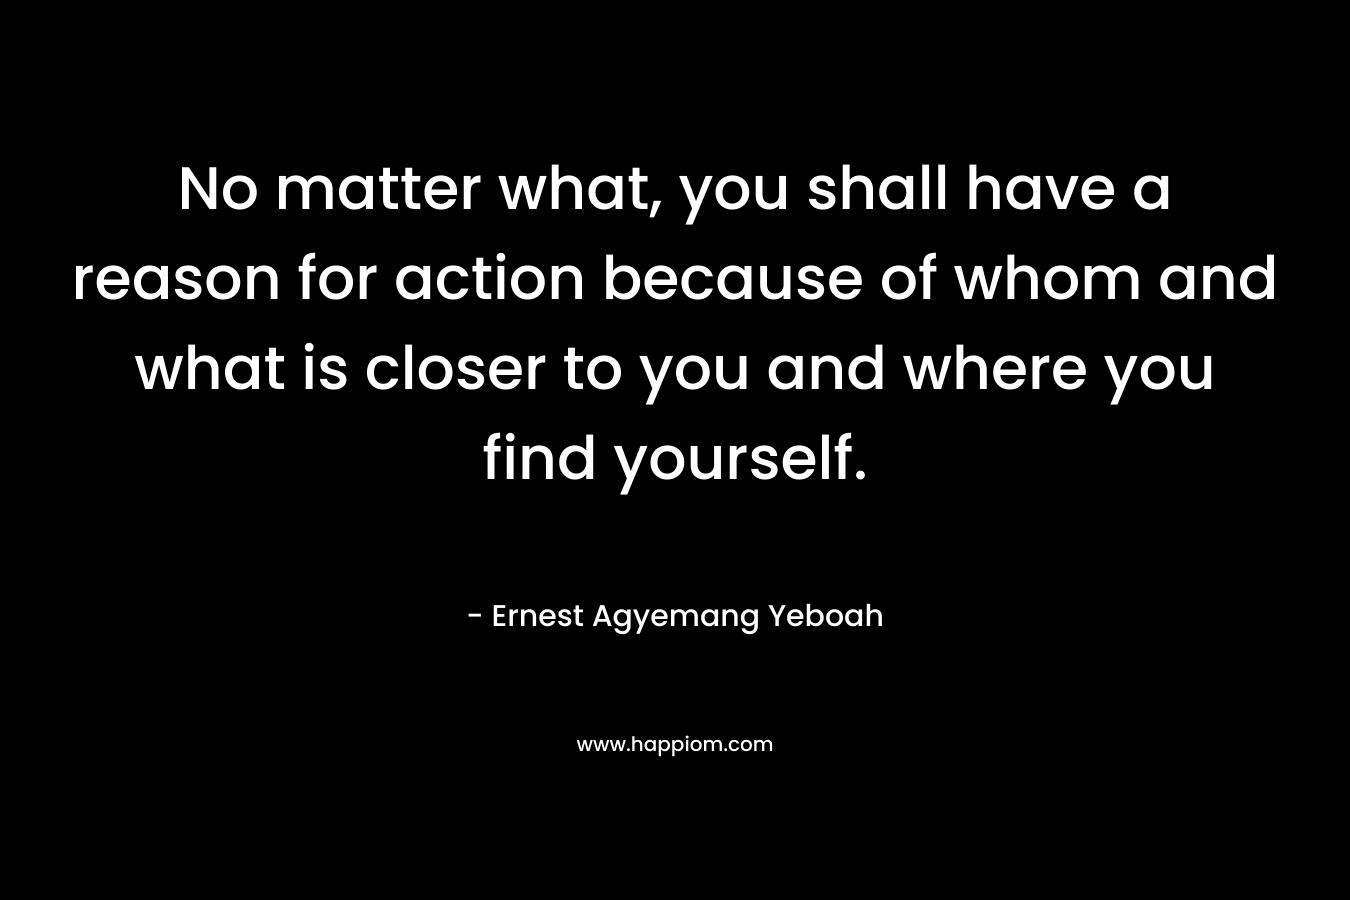 No matter what, you shall have a reason for action because of whom and what is closer to you and where you find yourself.